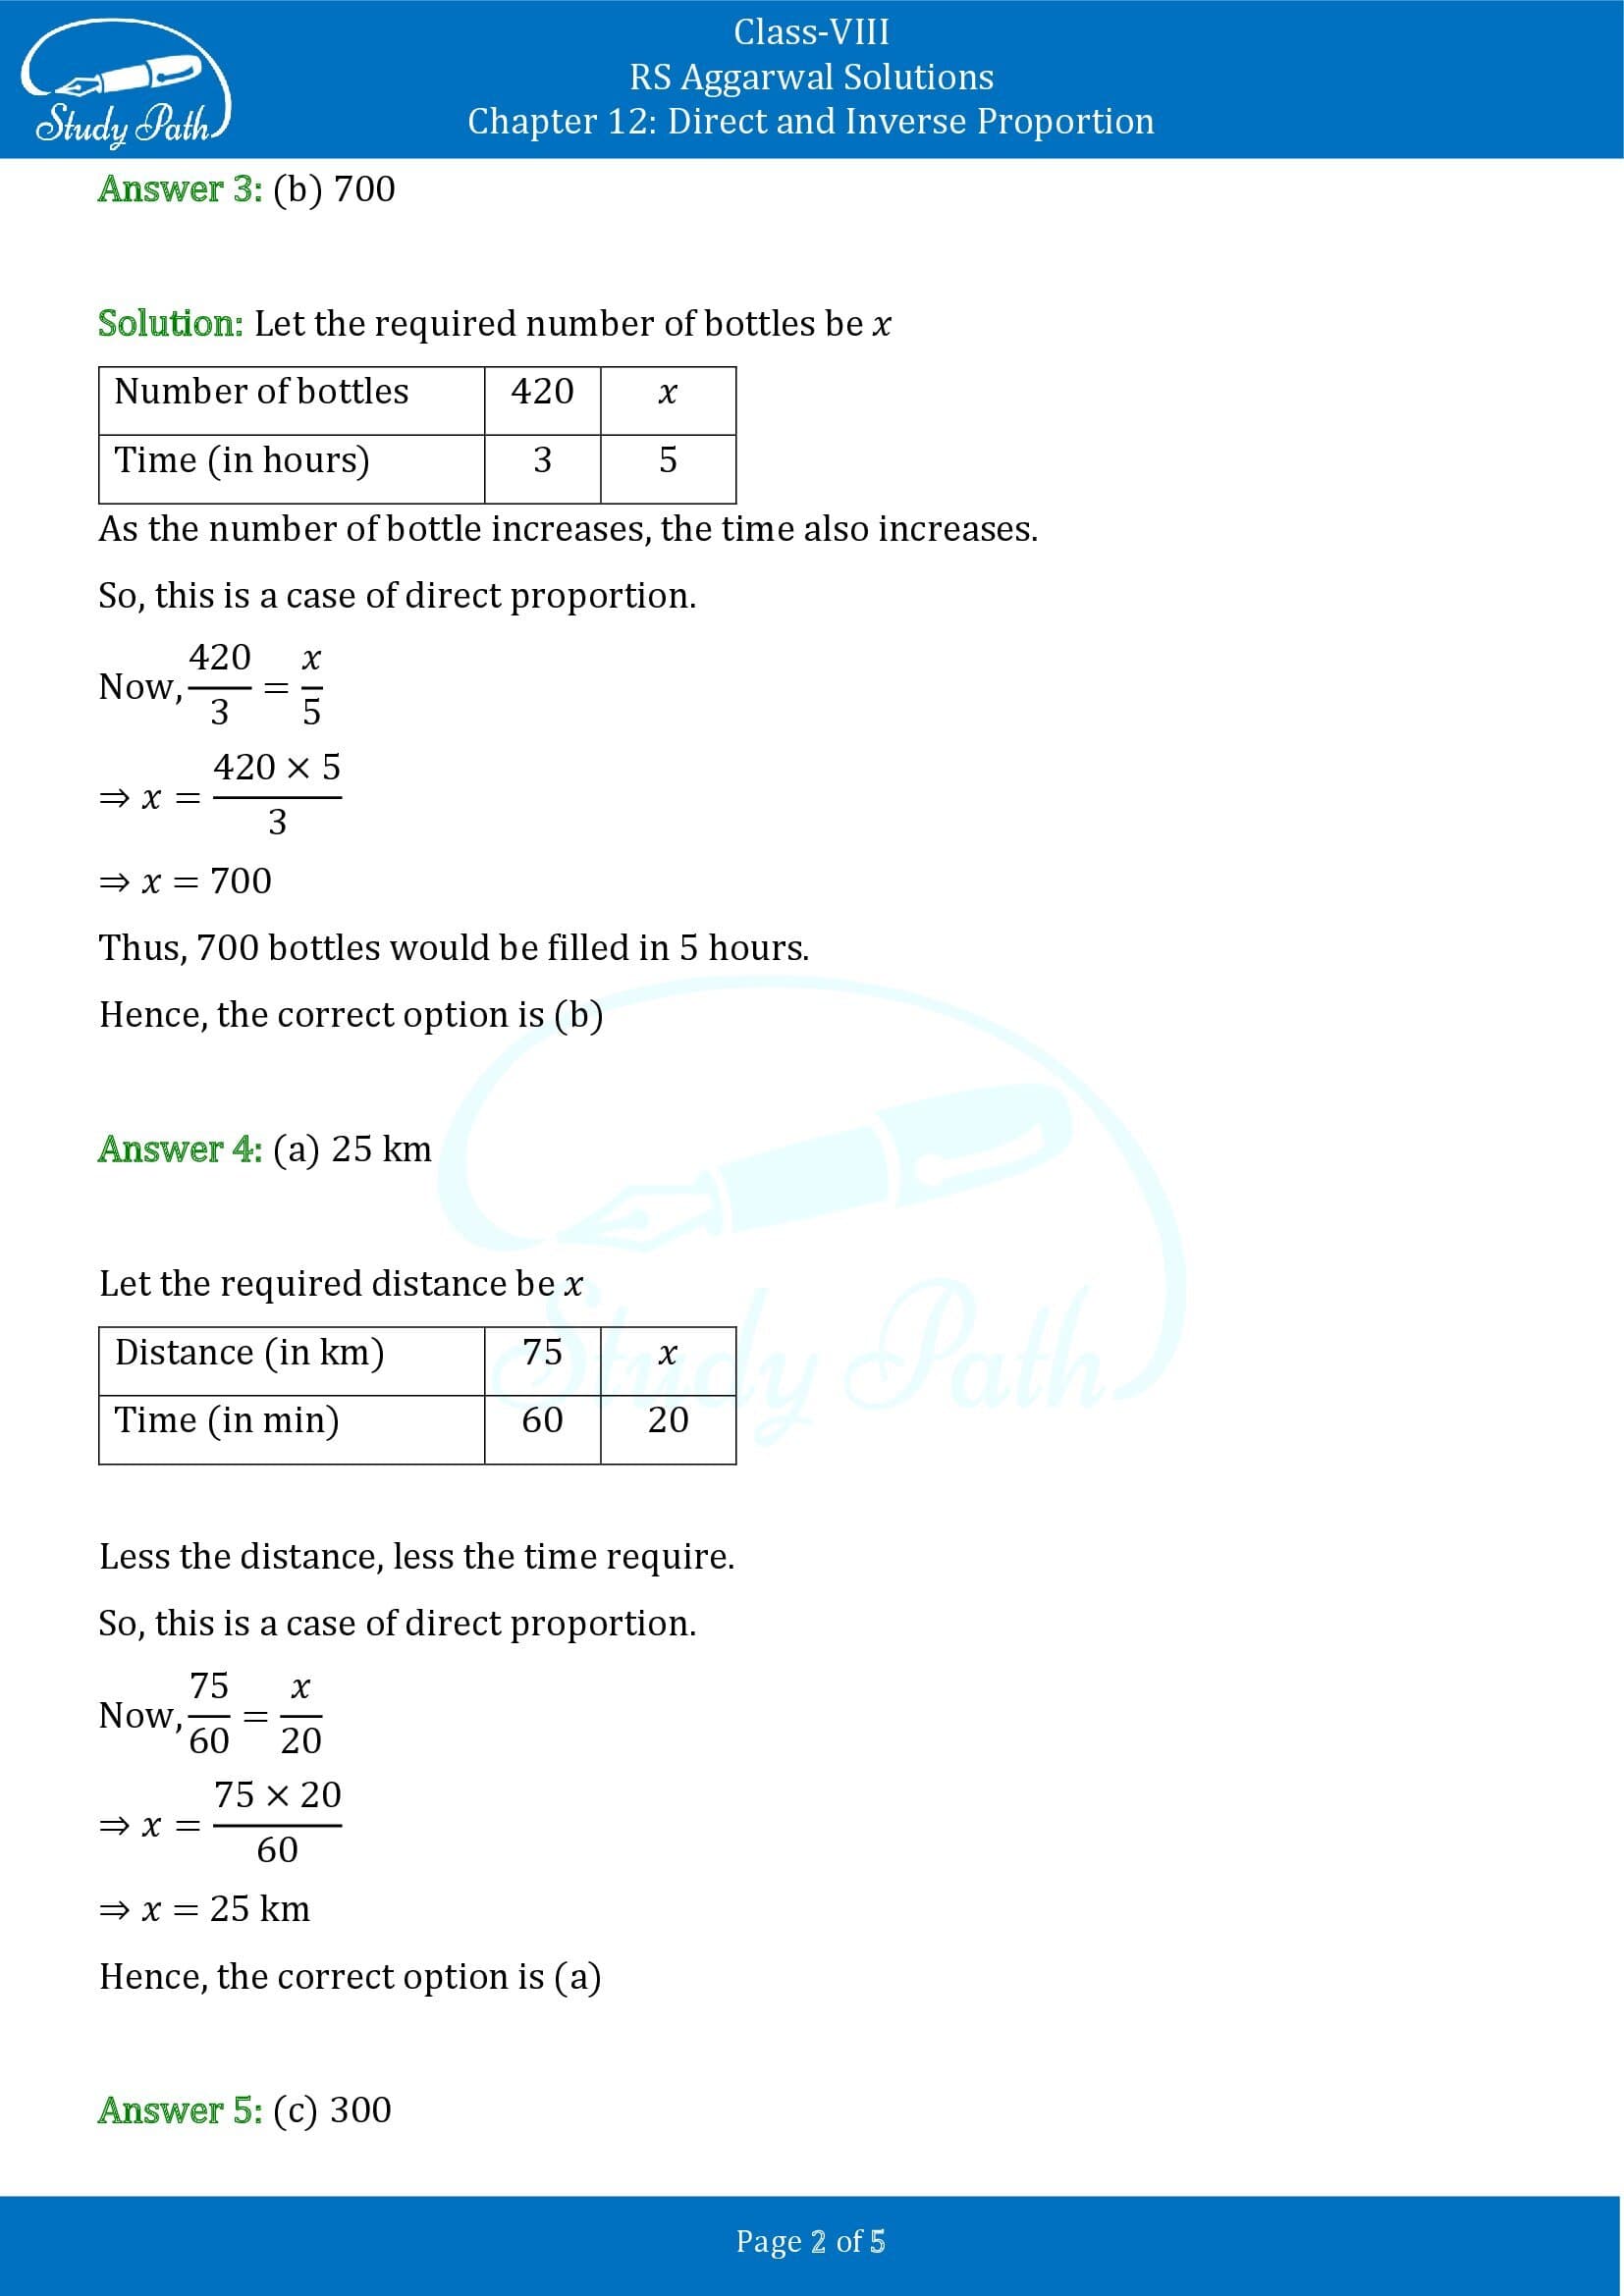 RS Aggarwal Solutions Class 8 Chapter 12 Direct and Inverse Proportion Exercise 12C MCQs 00002